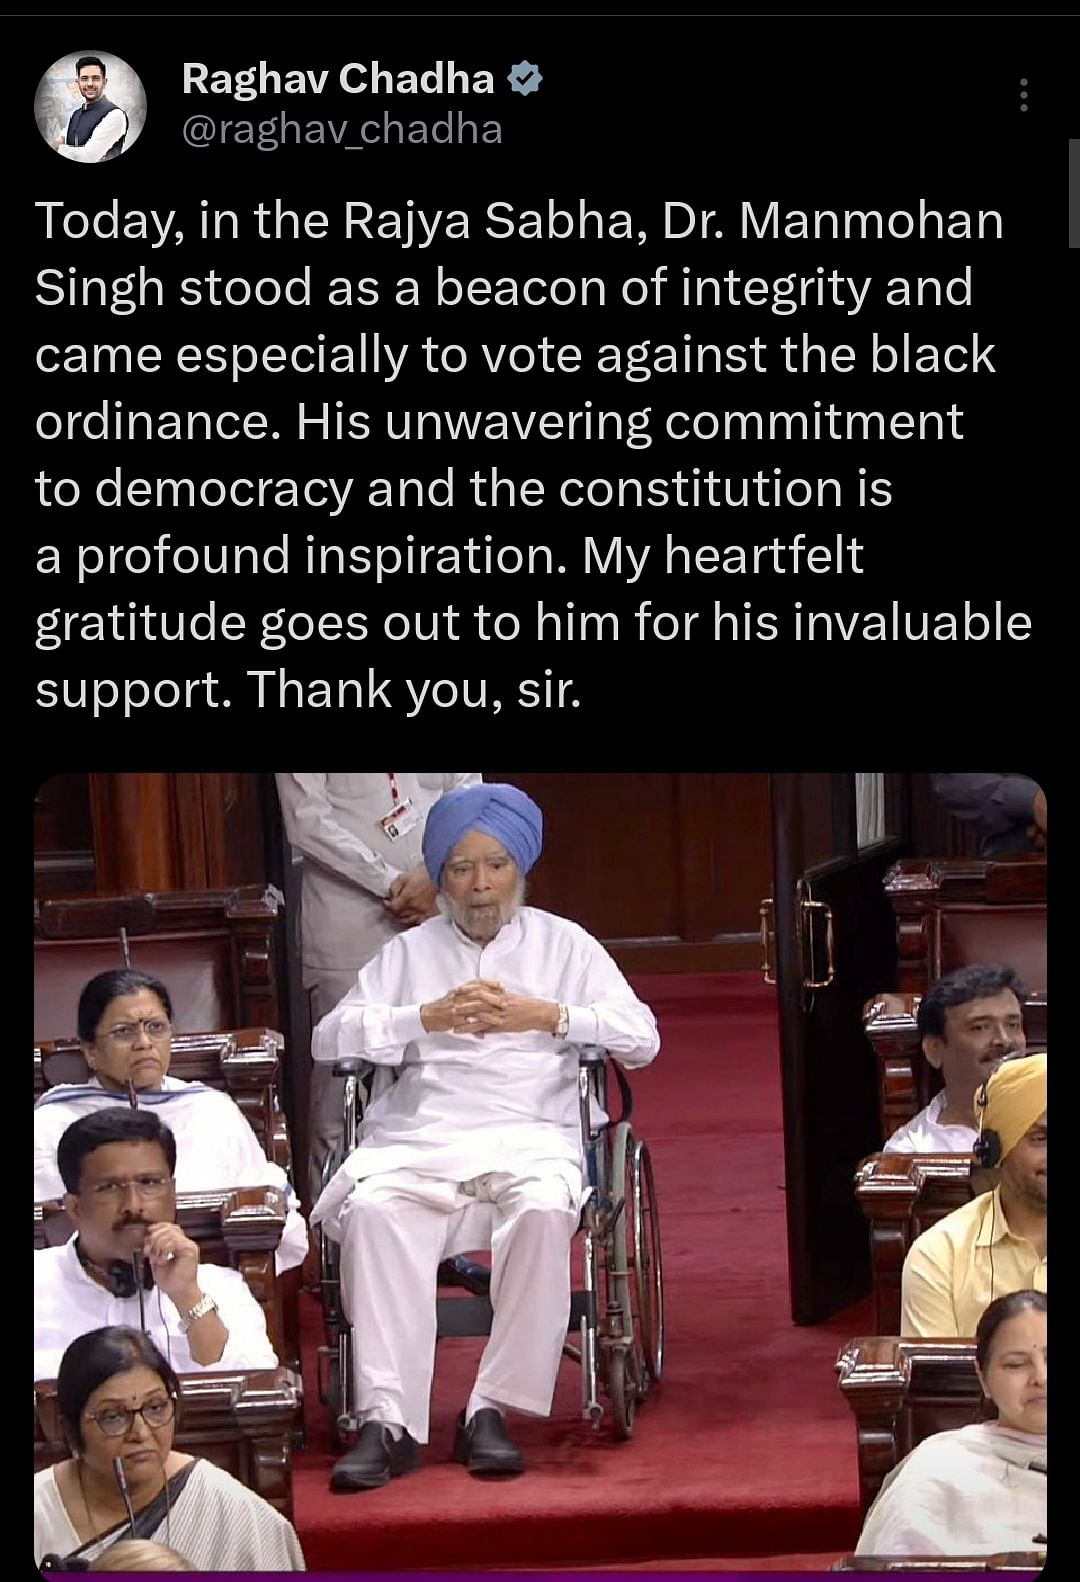 Dr Manmohan Singh came to vote against the Government of National Capital Territory of Delhi (Amendment) Bill.